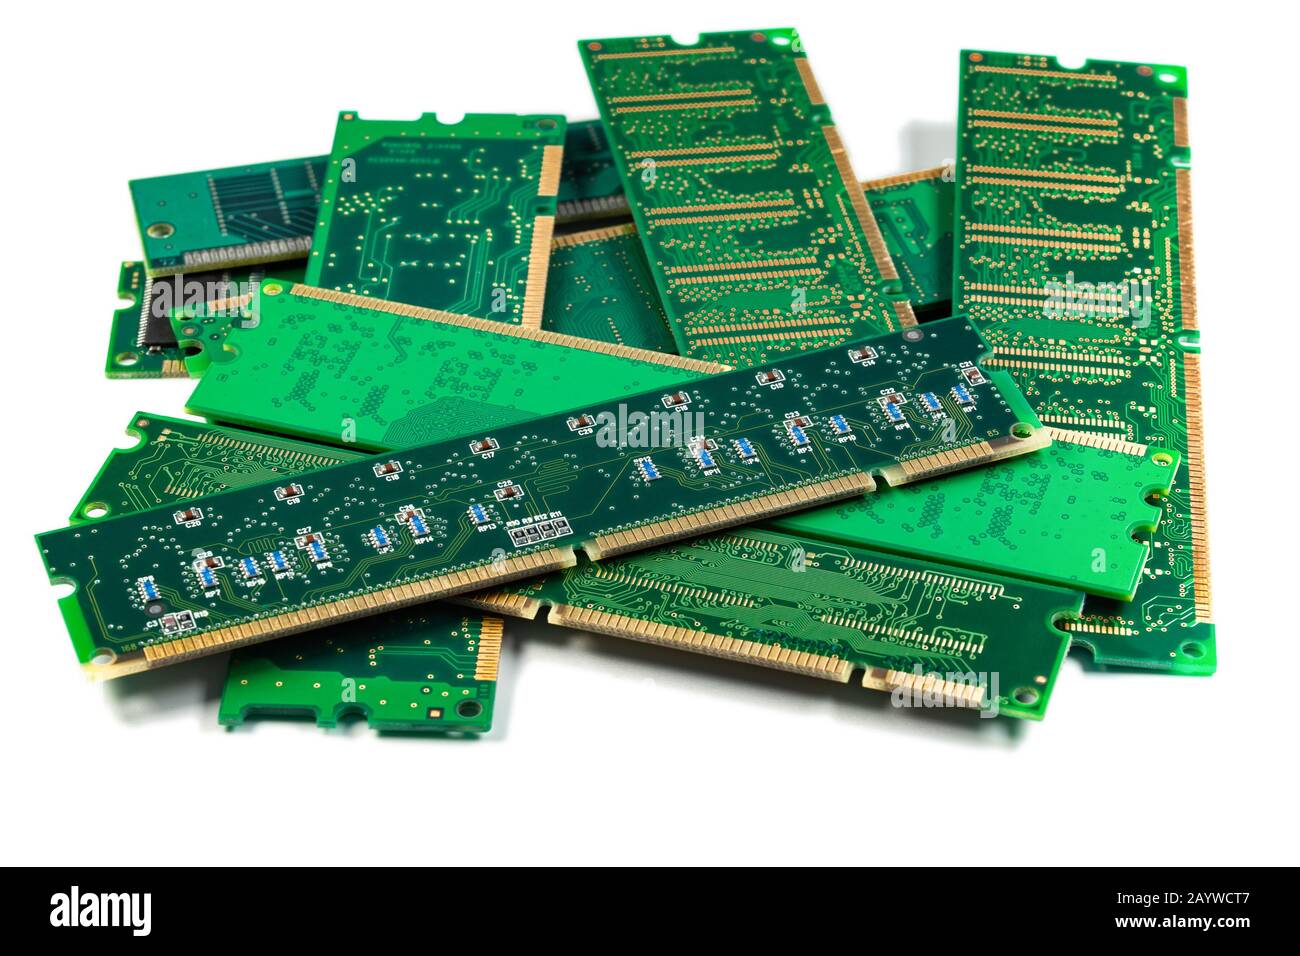 RAM modules for a computer, bunch on a white background. Stock Photo